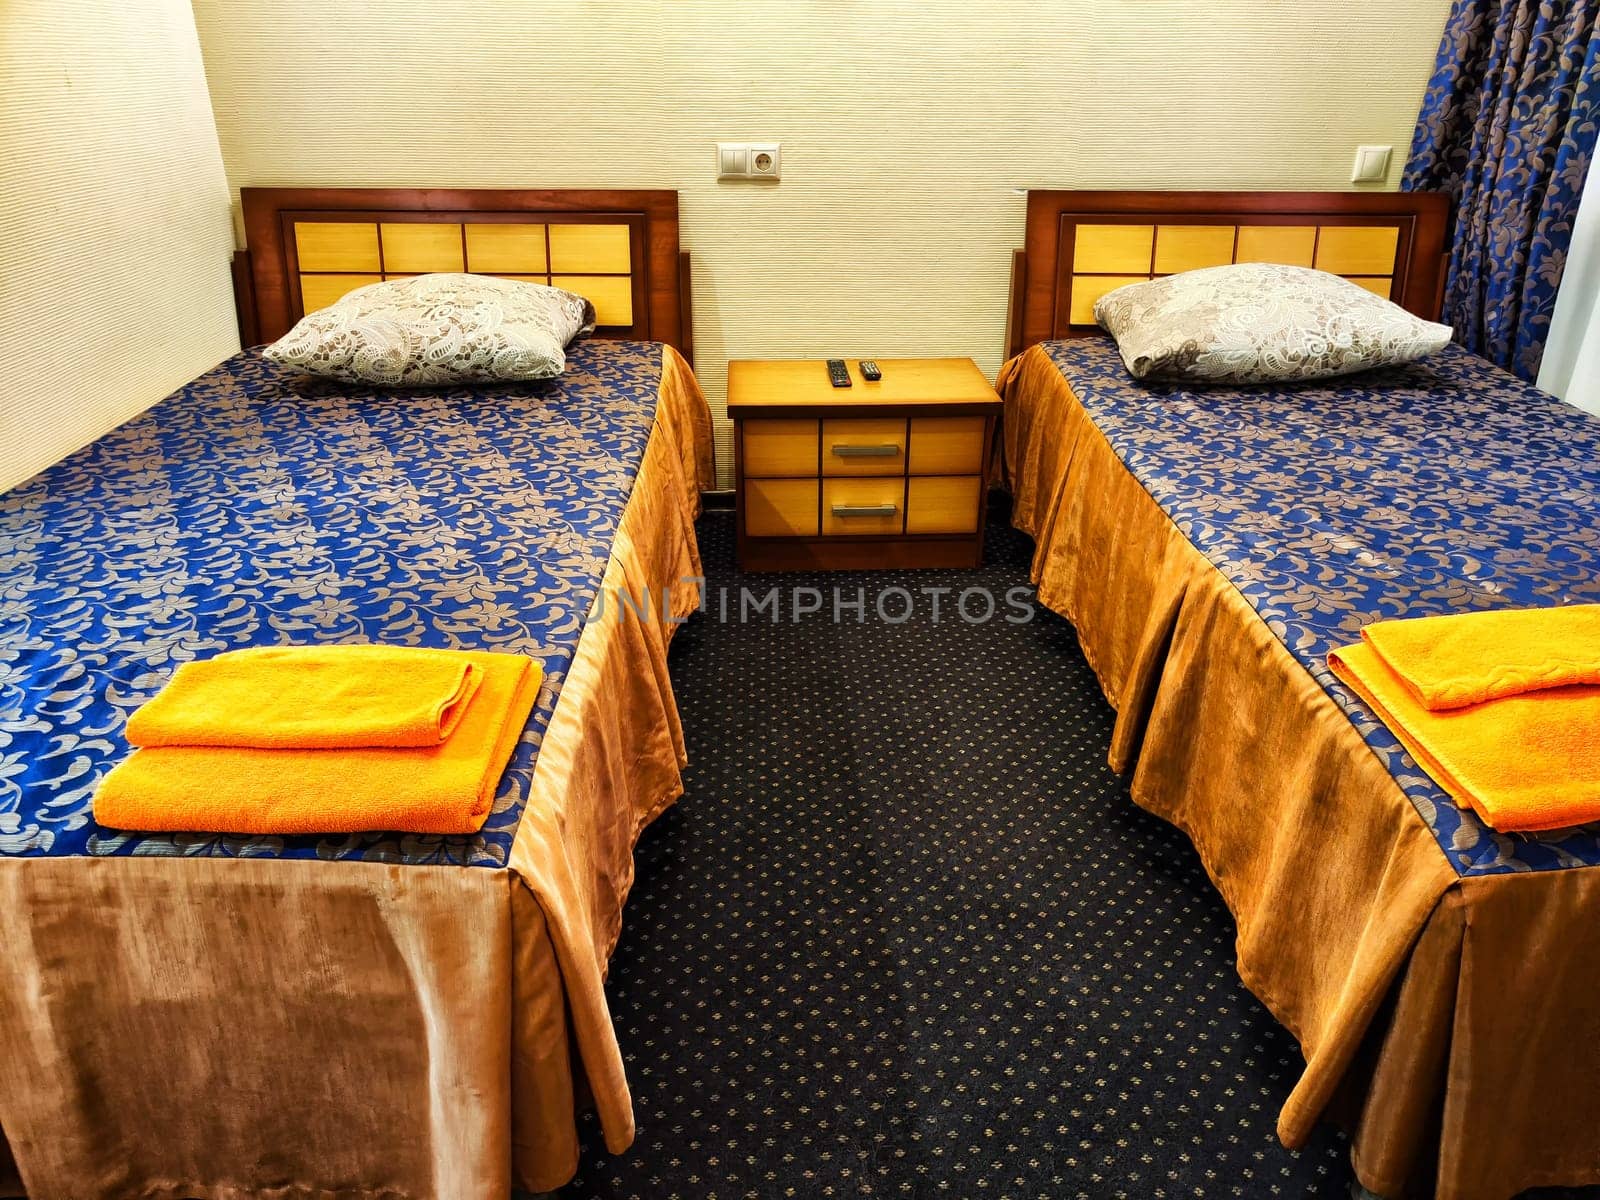 Twin Beds in Cozy Hotel Room. Two single beds with blue bedding and orange towels in a hotel room